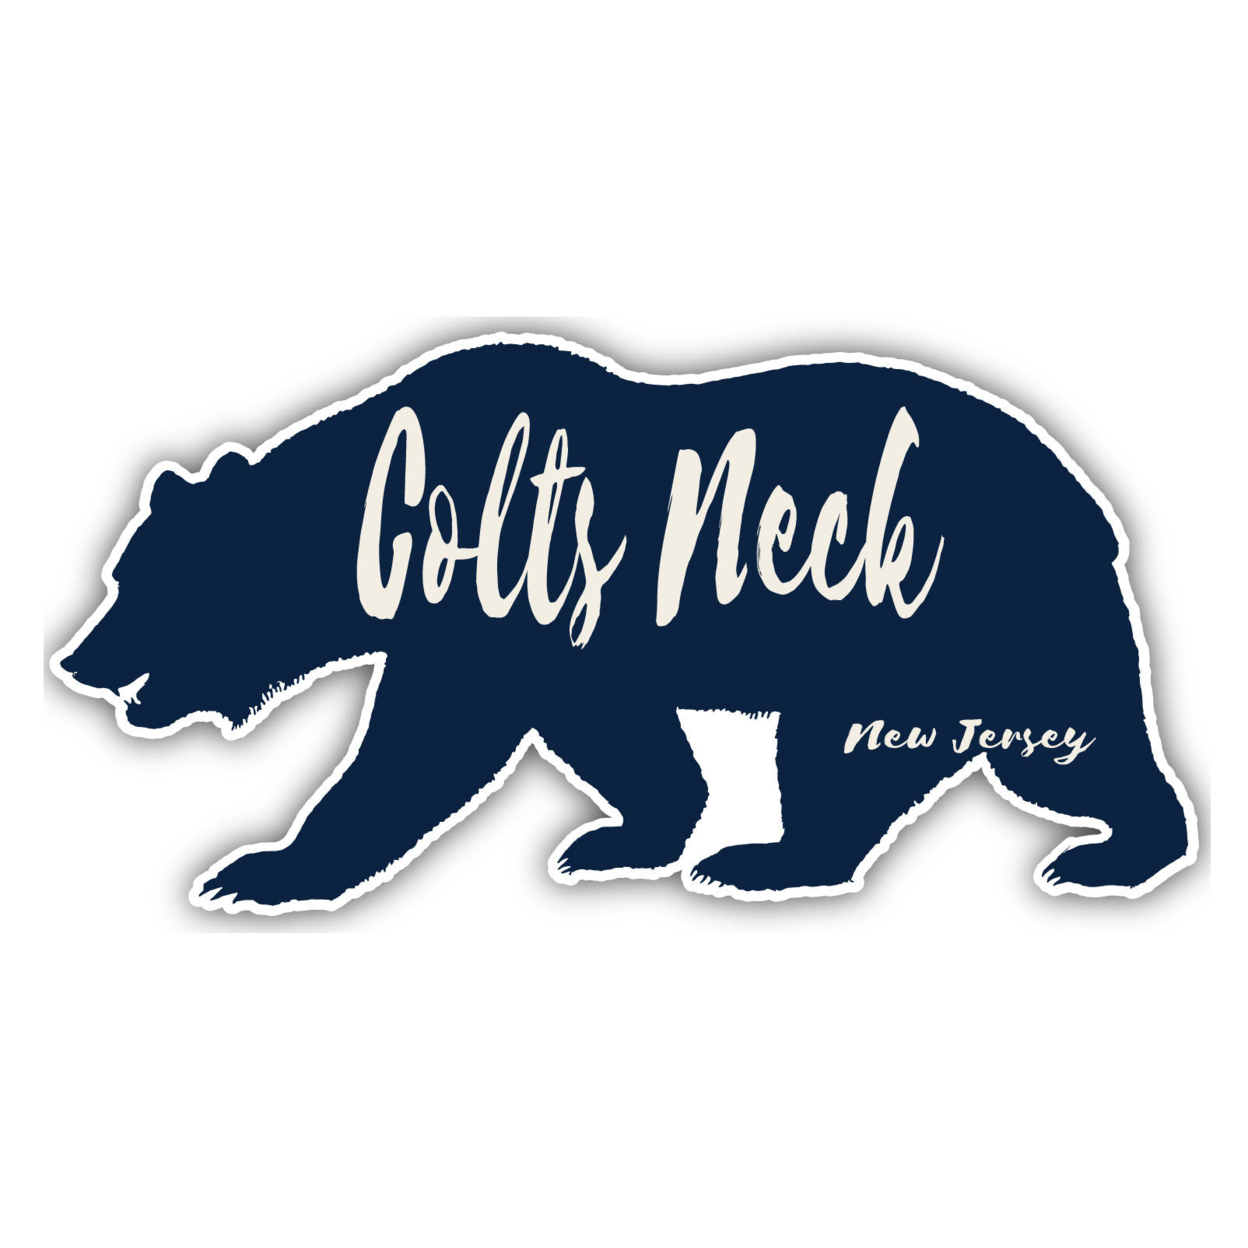 Colts Neck New Jersey Souvenir Decorative Stickers (Choose Theme And Size) - 4-Pack, 2-Inch, Bear